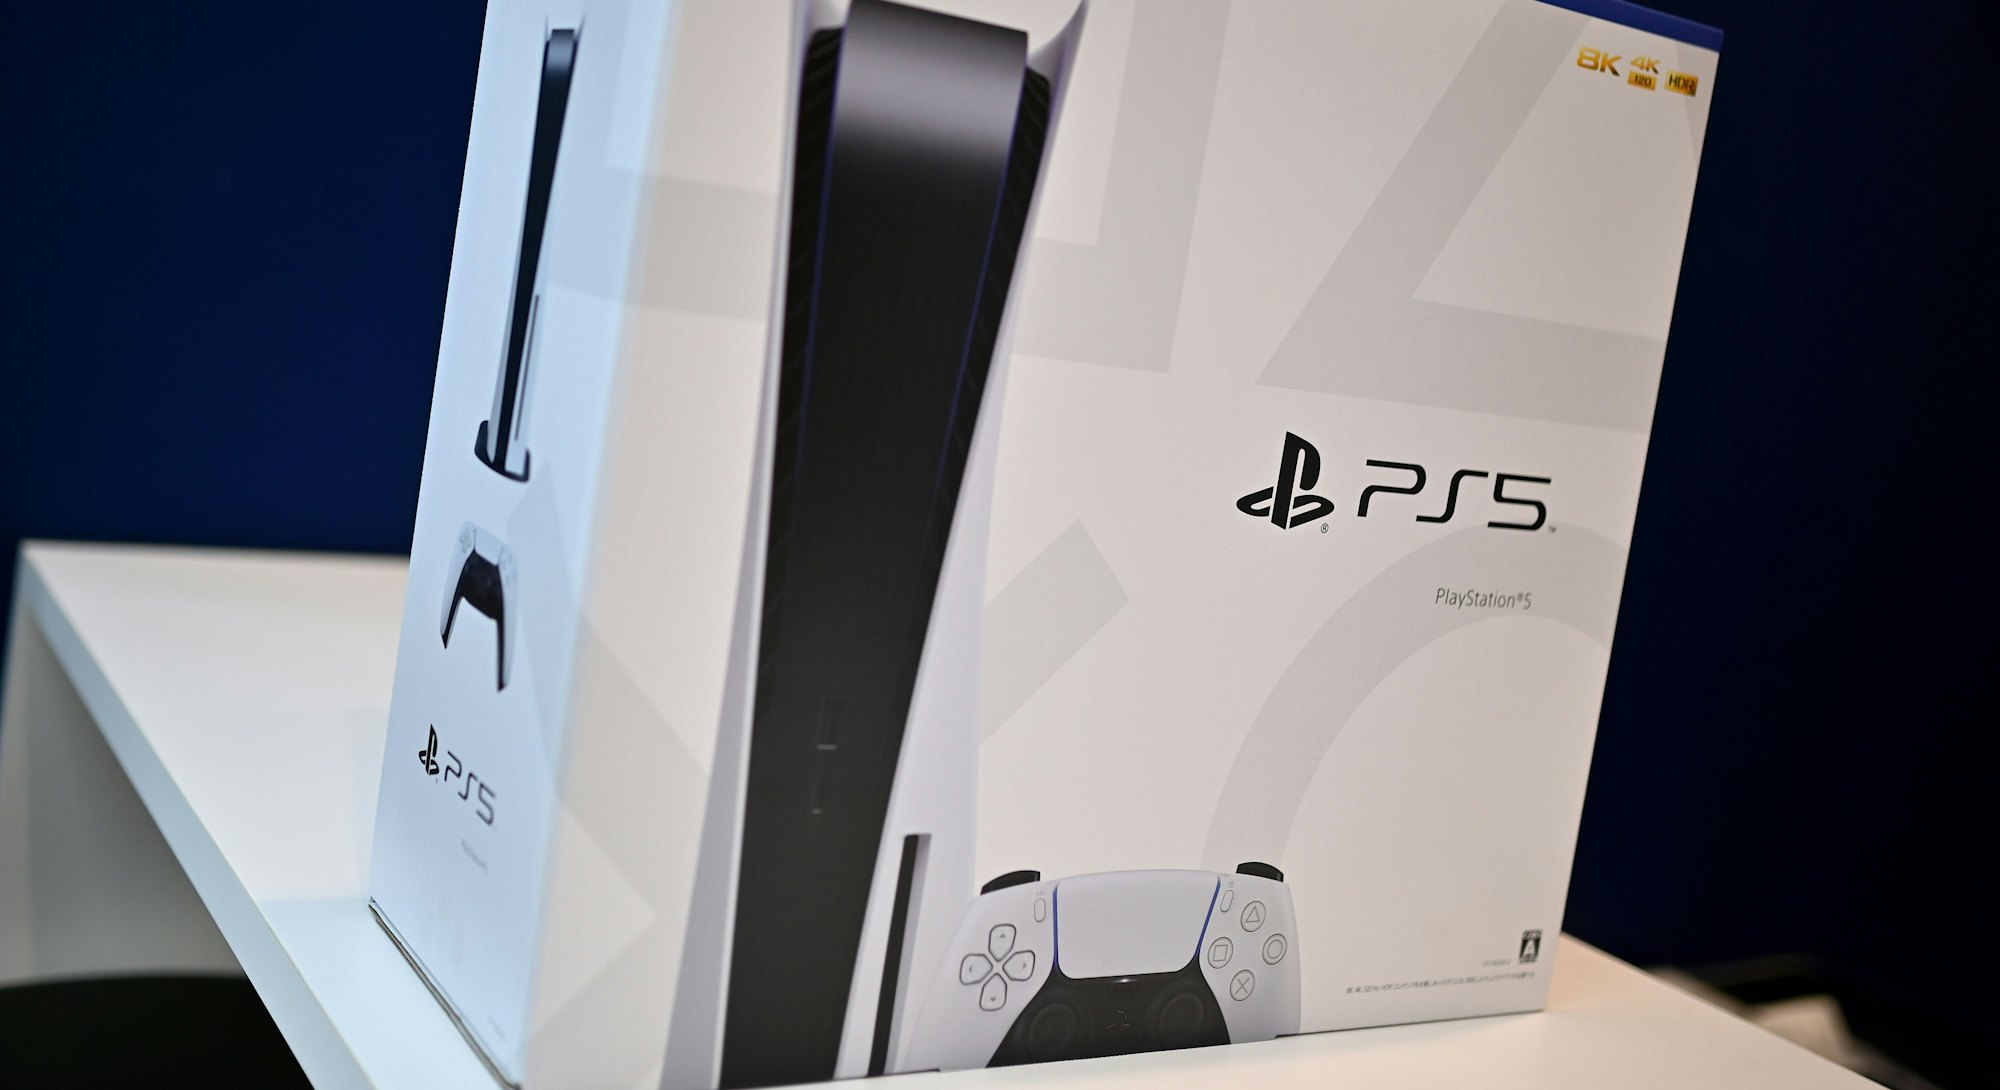 The new Sony PlayStation 5 gaming console is seen for sale on the first day of its launch, at an ele...